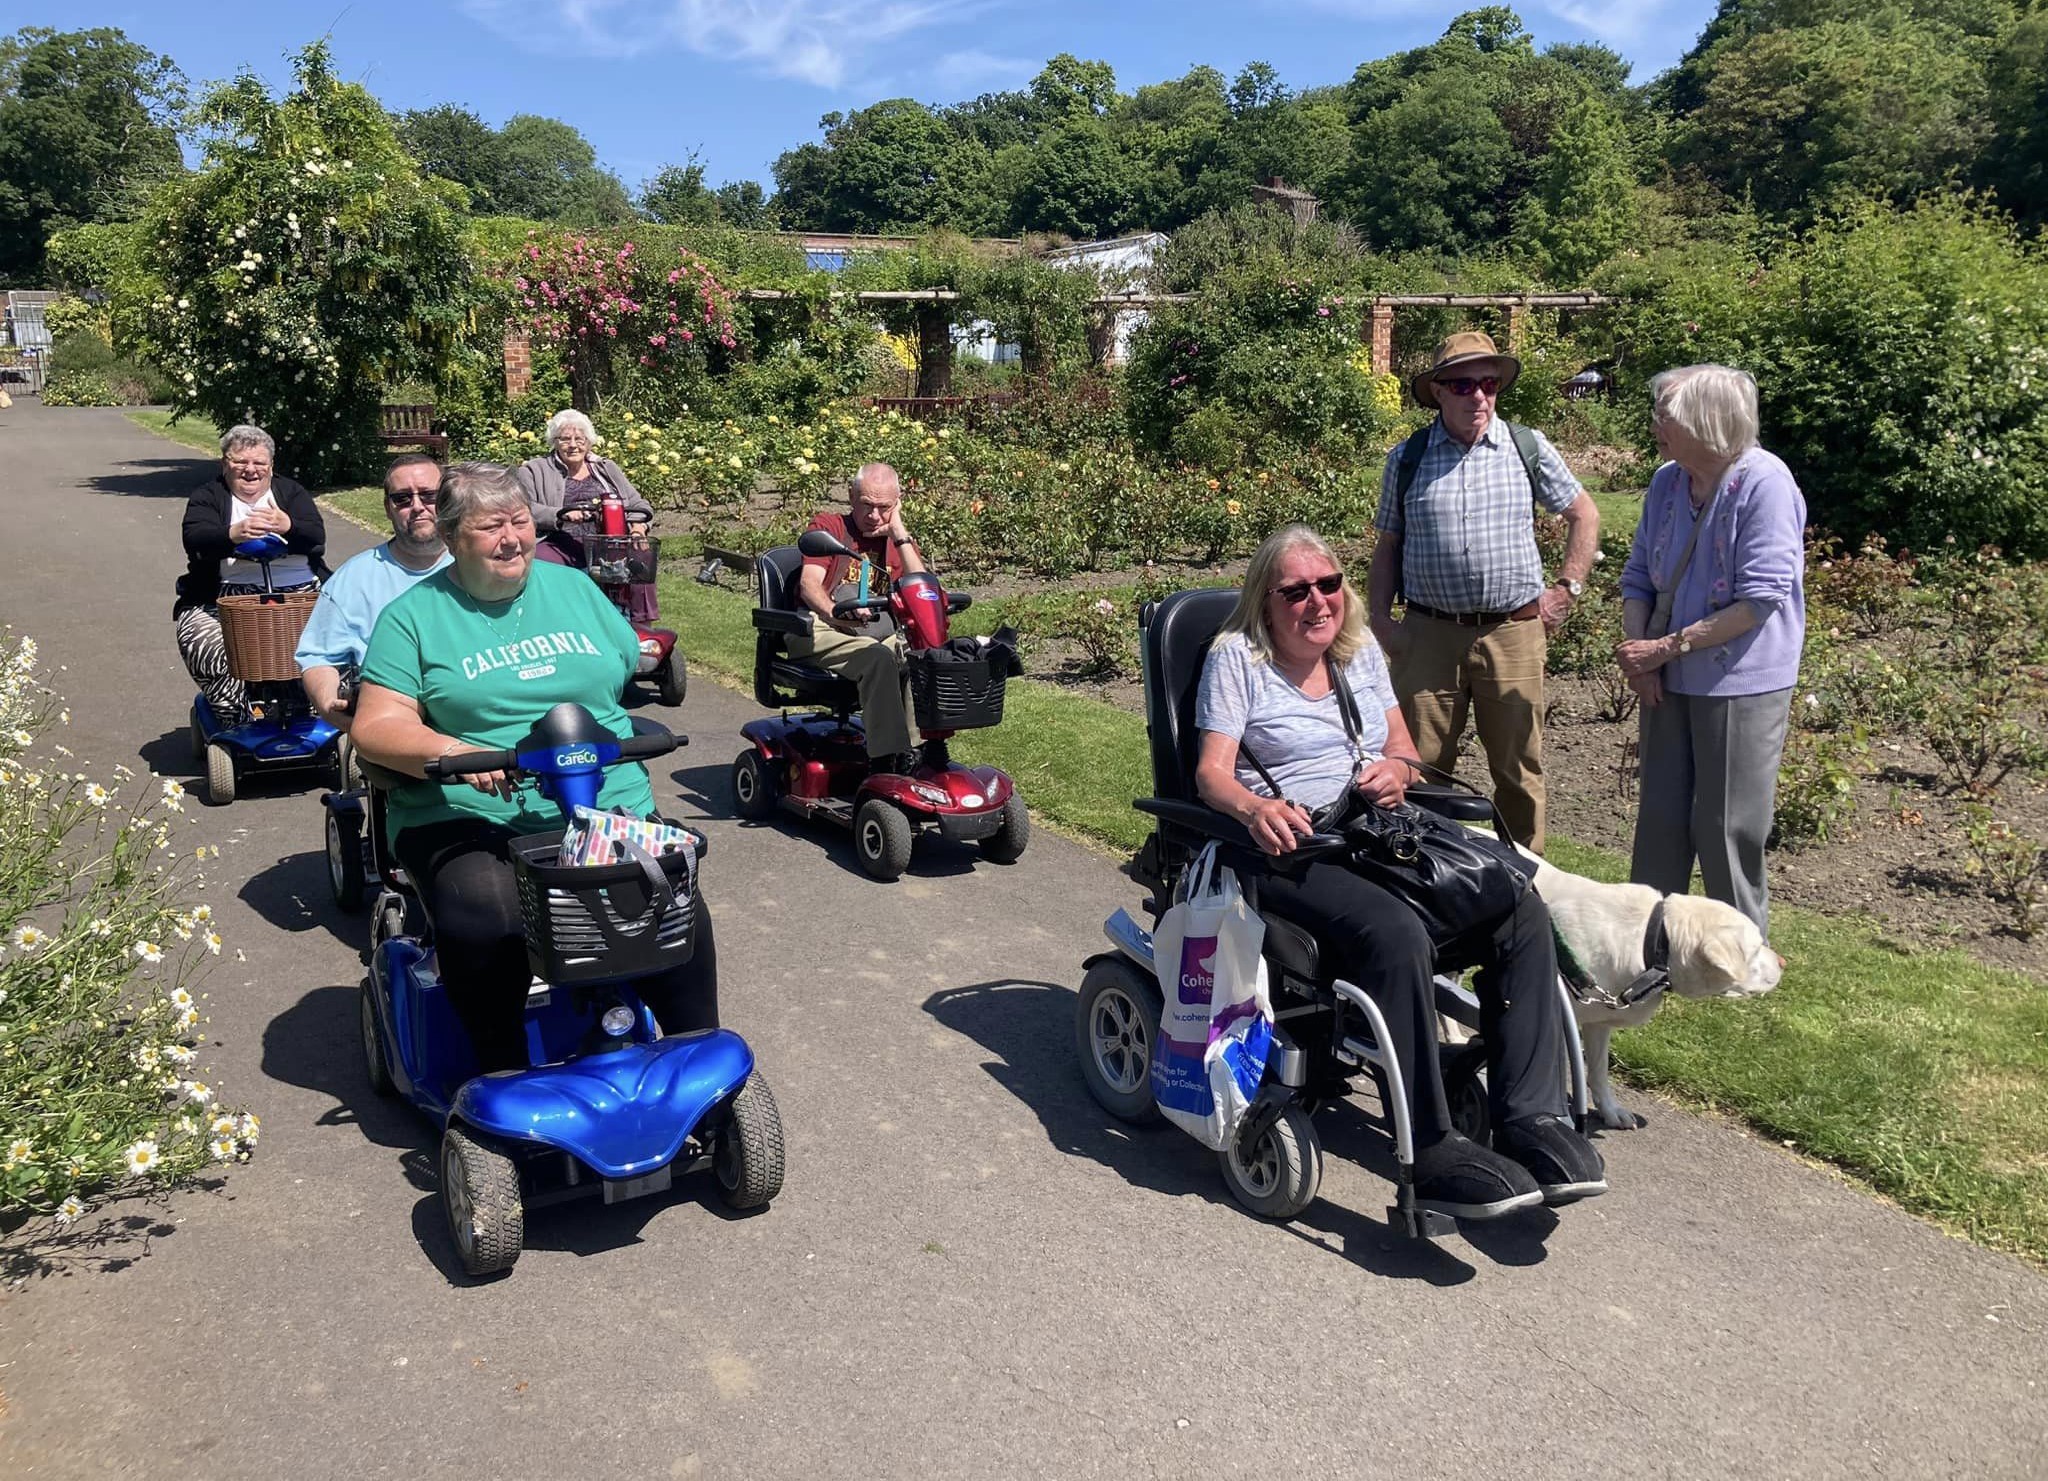 A group of mobility scooter users in a sunny park